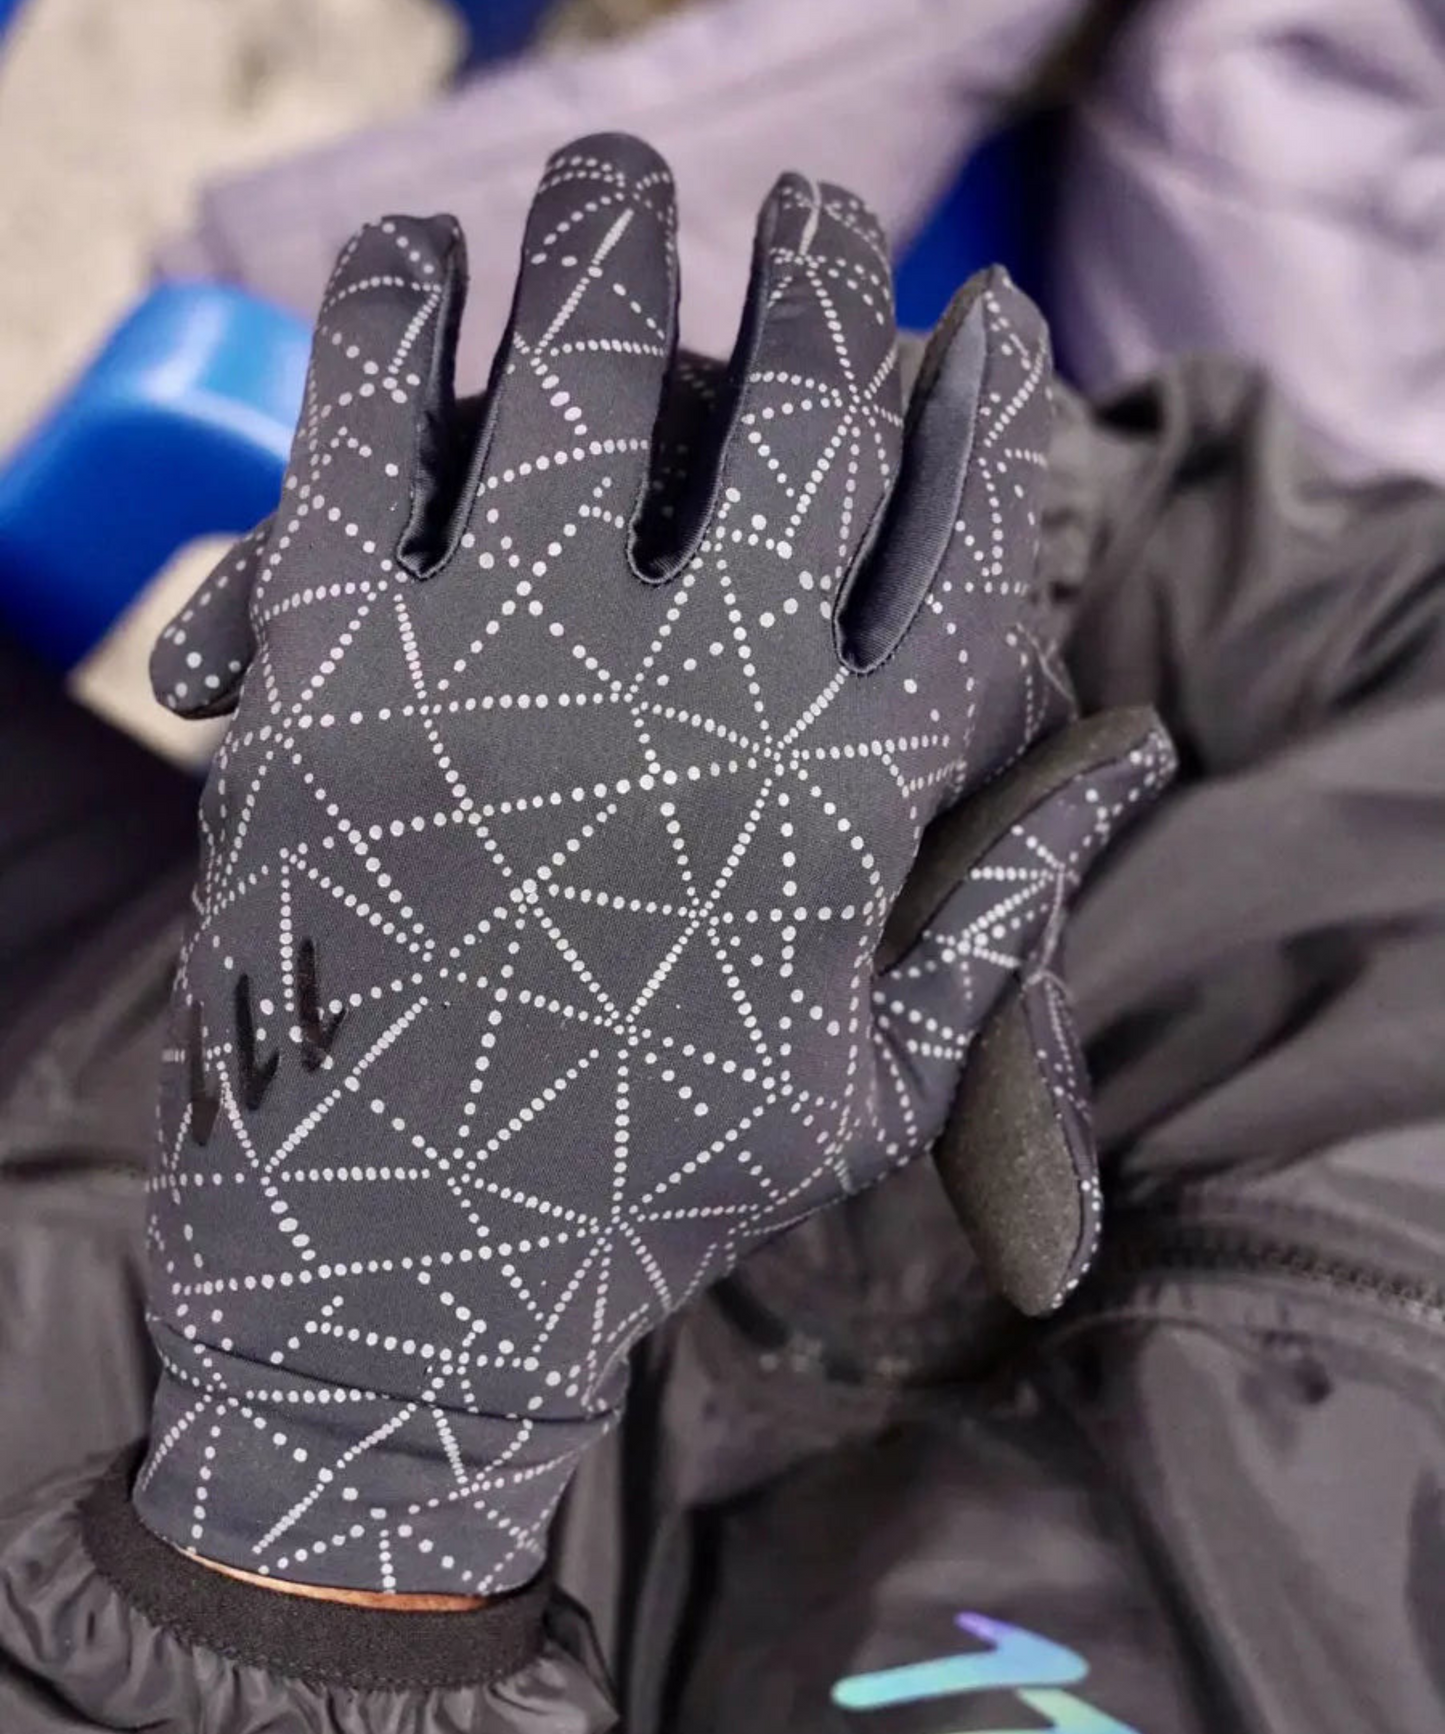 Long distance gloves with reflective details